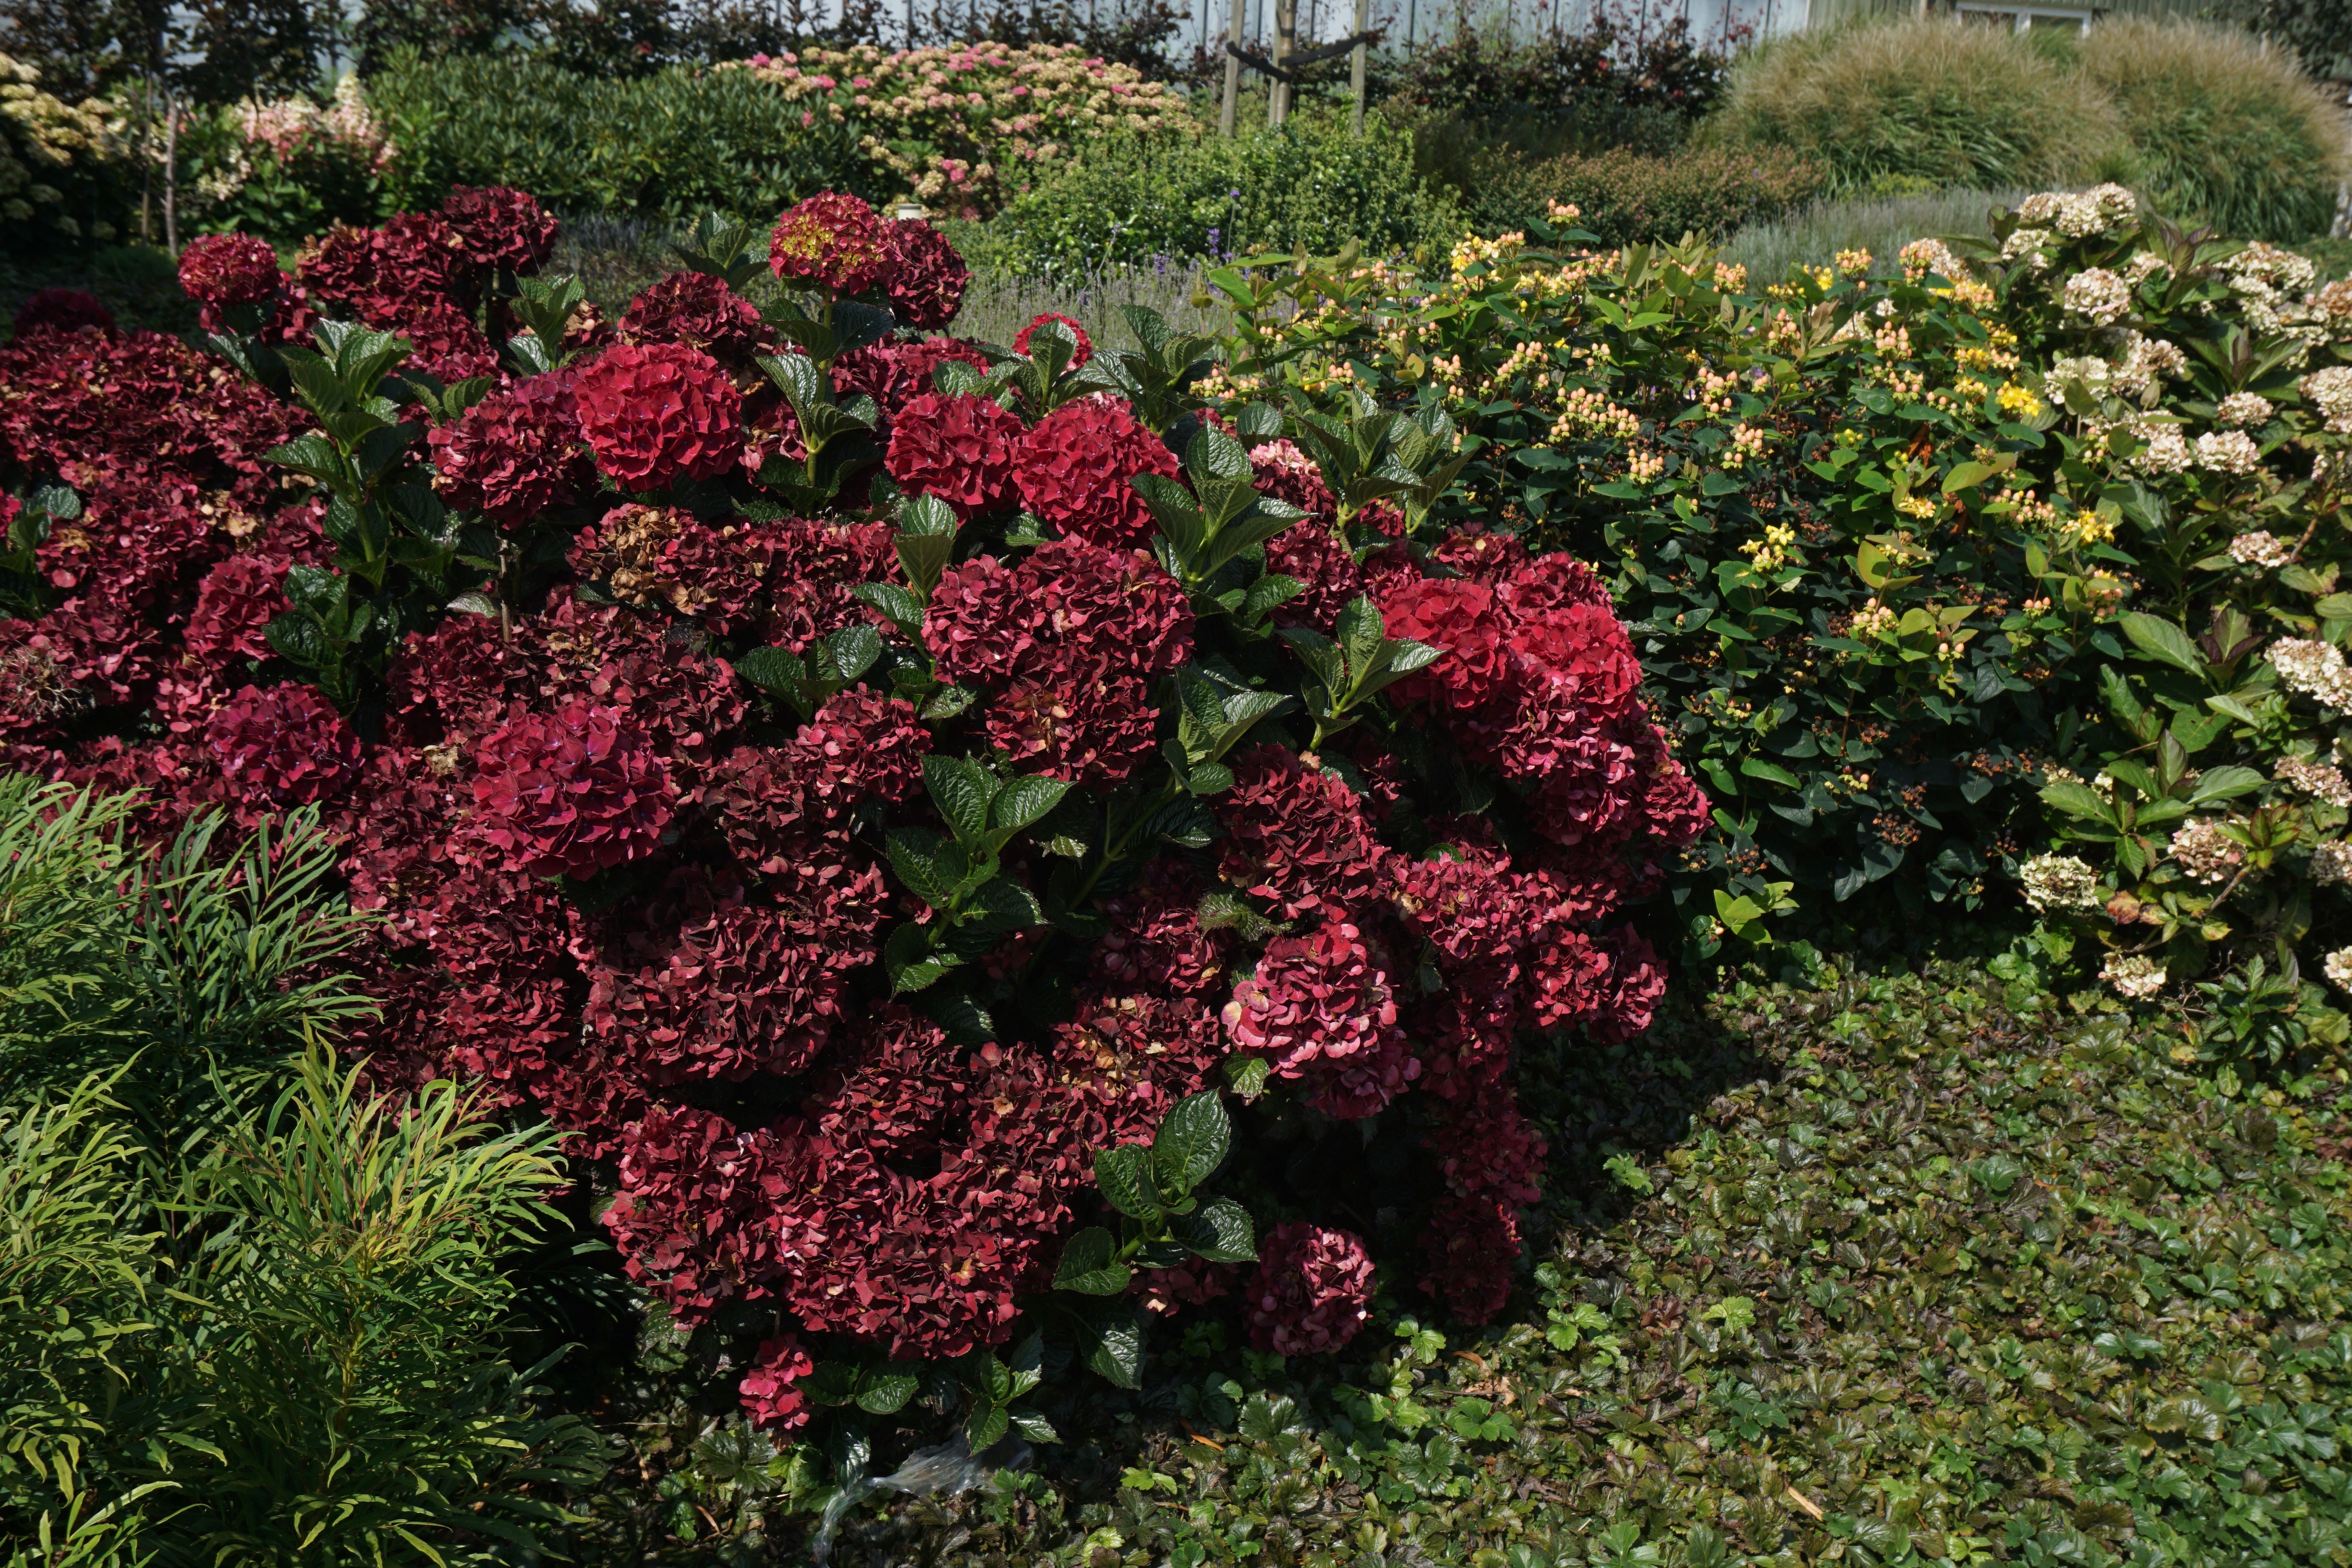 images/plants/hydrangea/hyd-magical-everlasting-crimson/hyd-magical-everlasting-crimson-0004.jpg